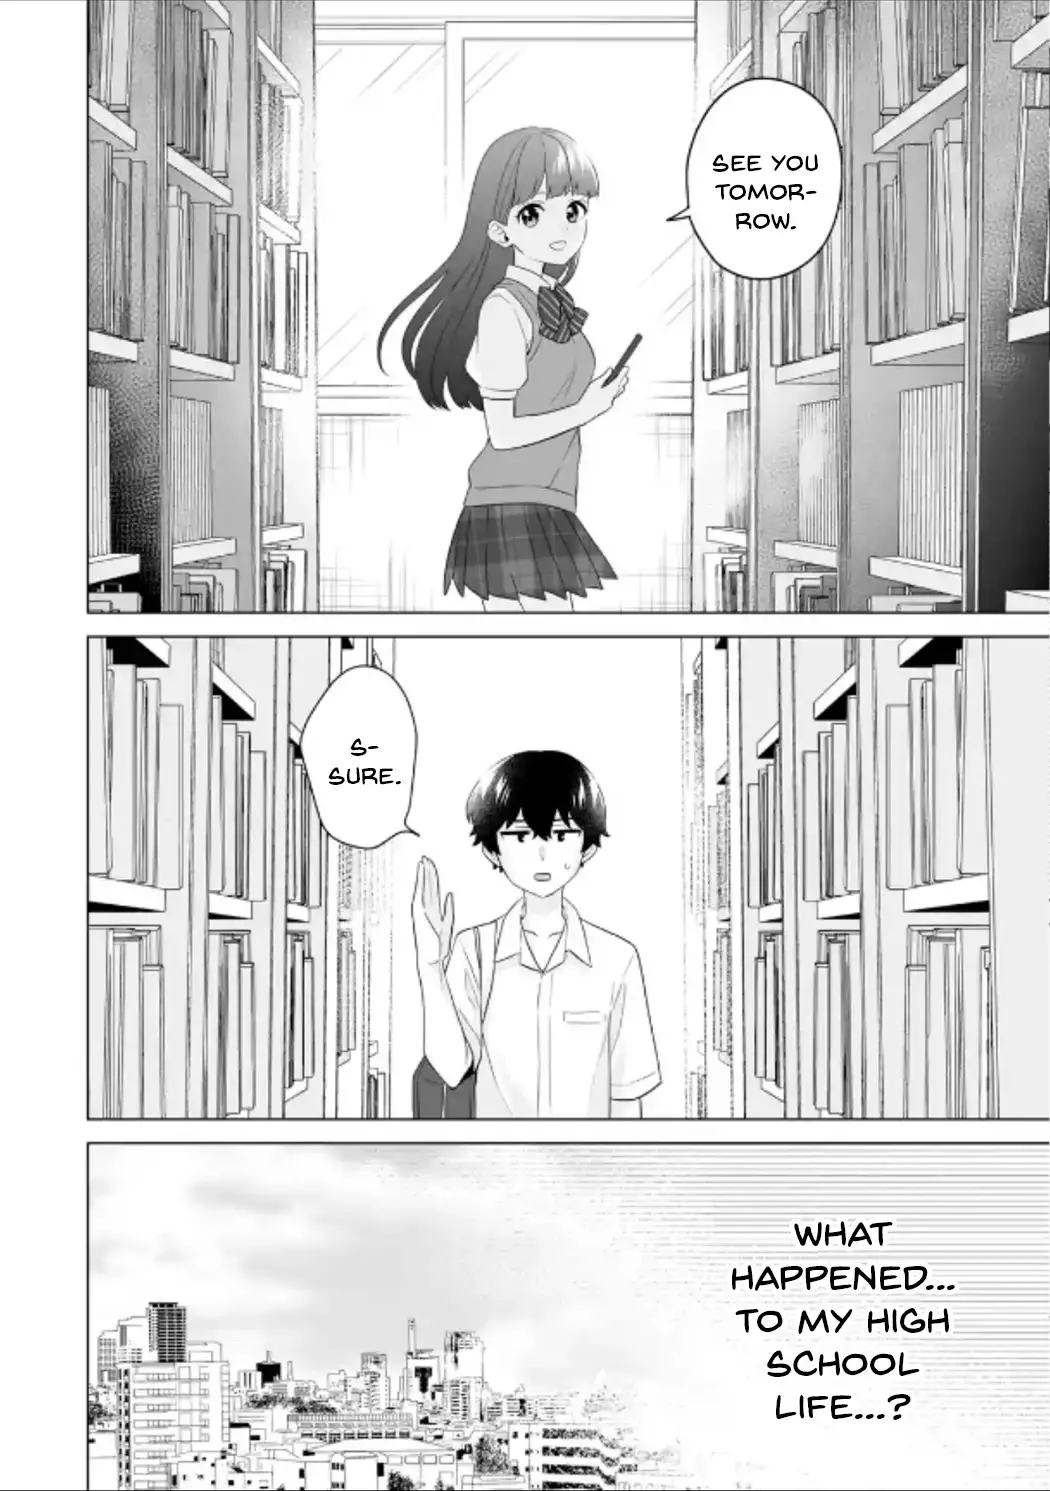 Please Leave Me Alone (For Some Reason, She Wants To Change A Lone Wolf's Helpless High School Life.) - 10 page 18-16f01528